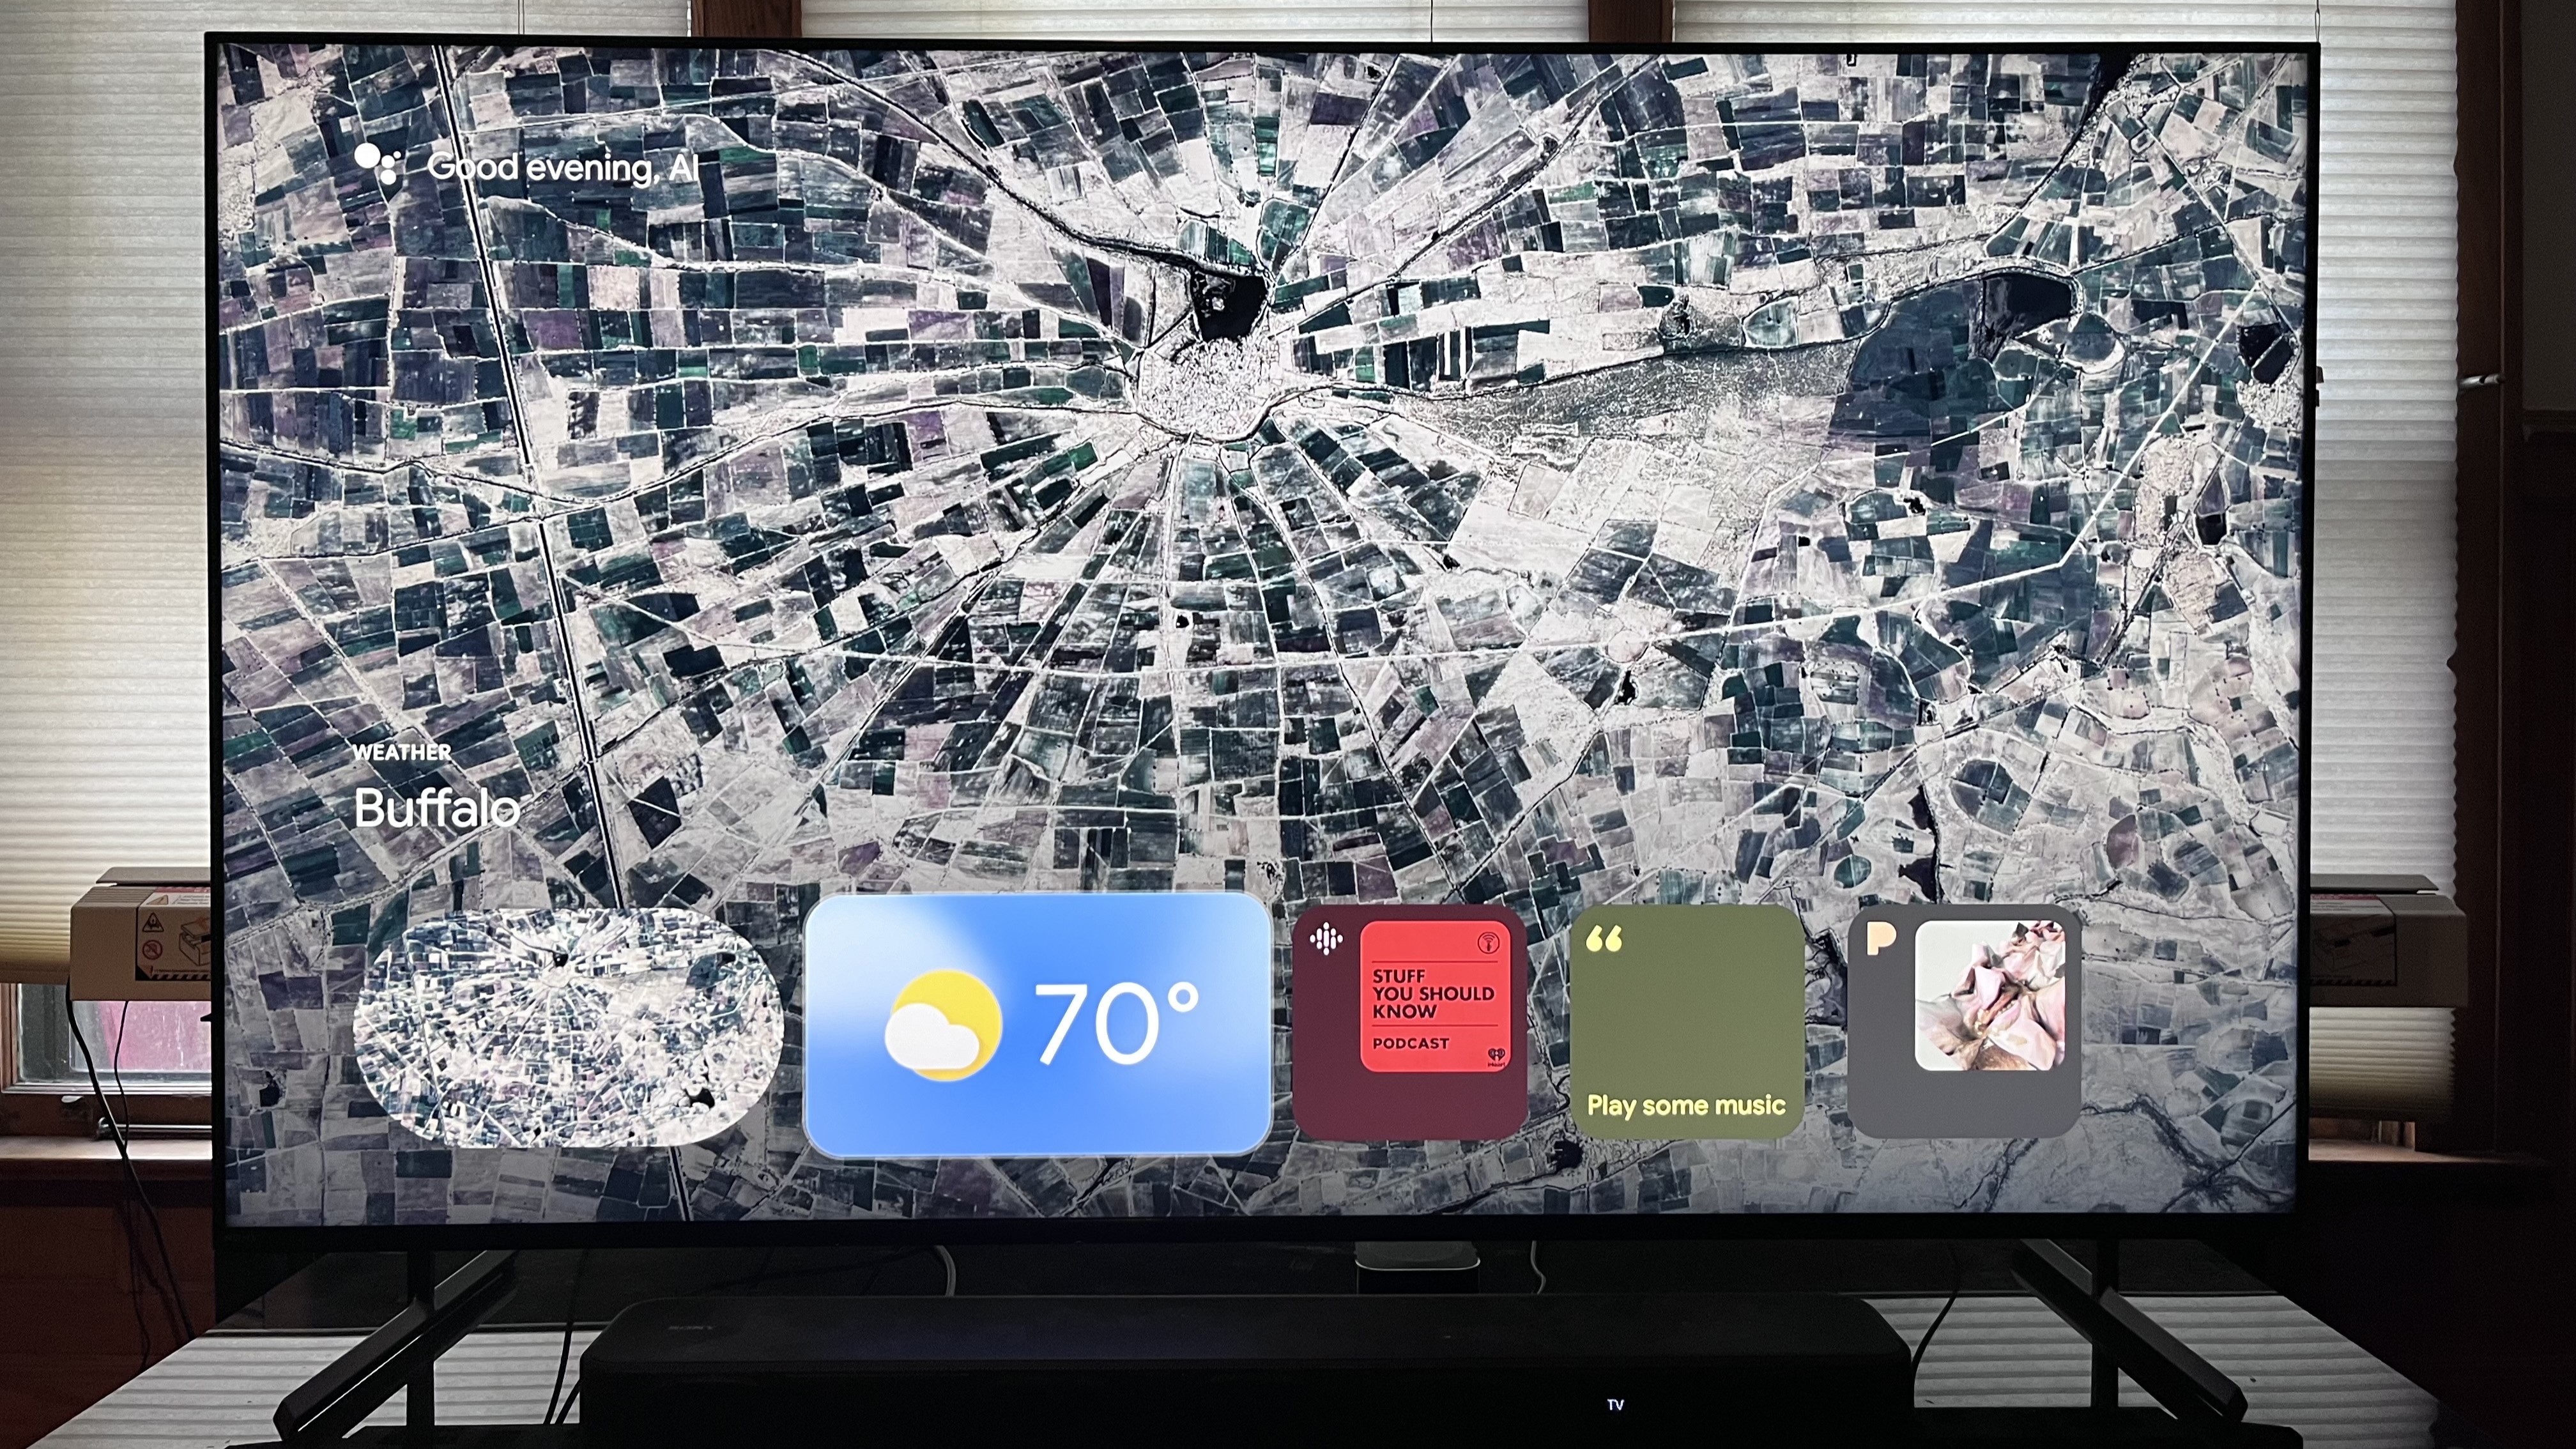 Sony X90L in Google TV ambient mode